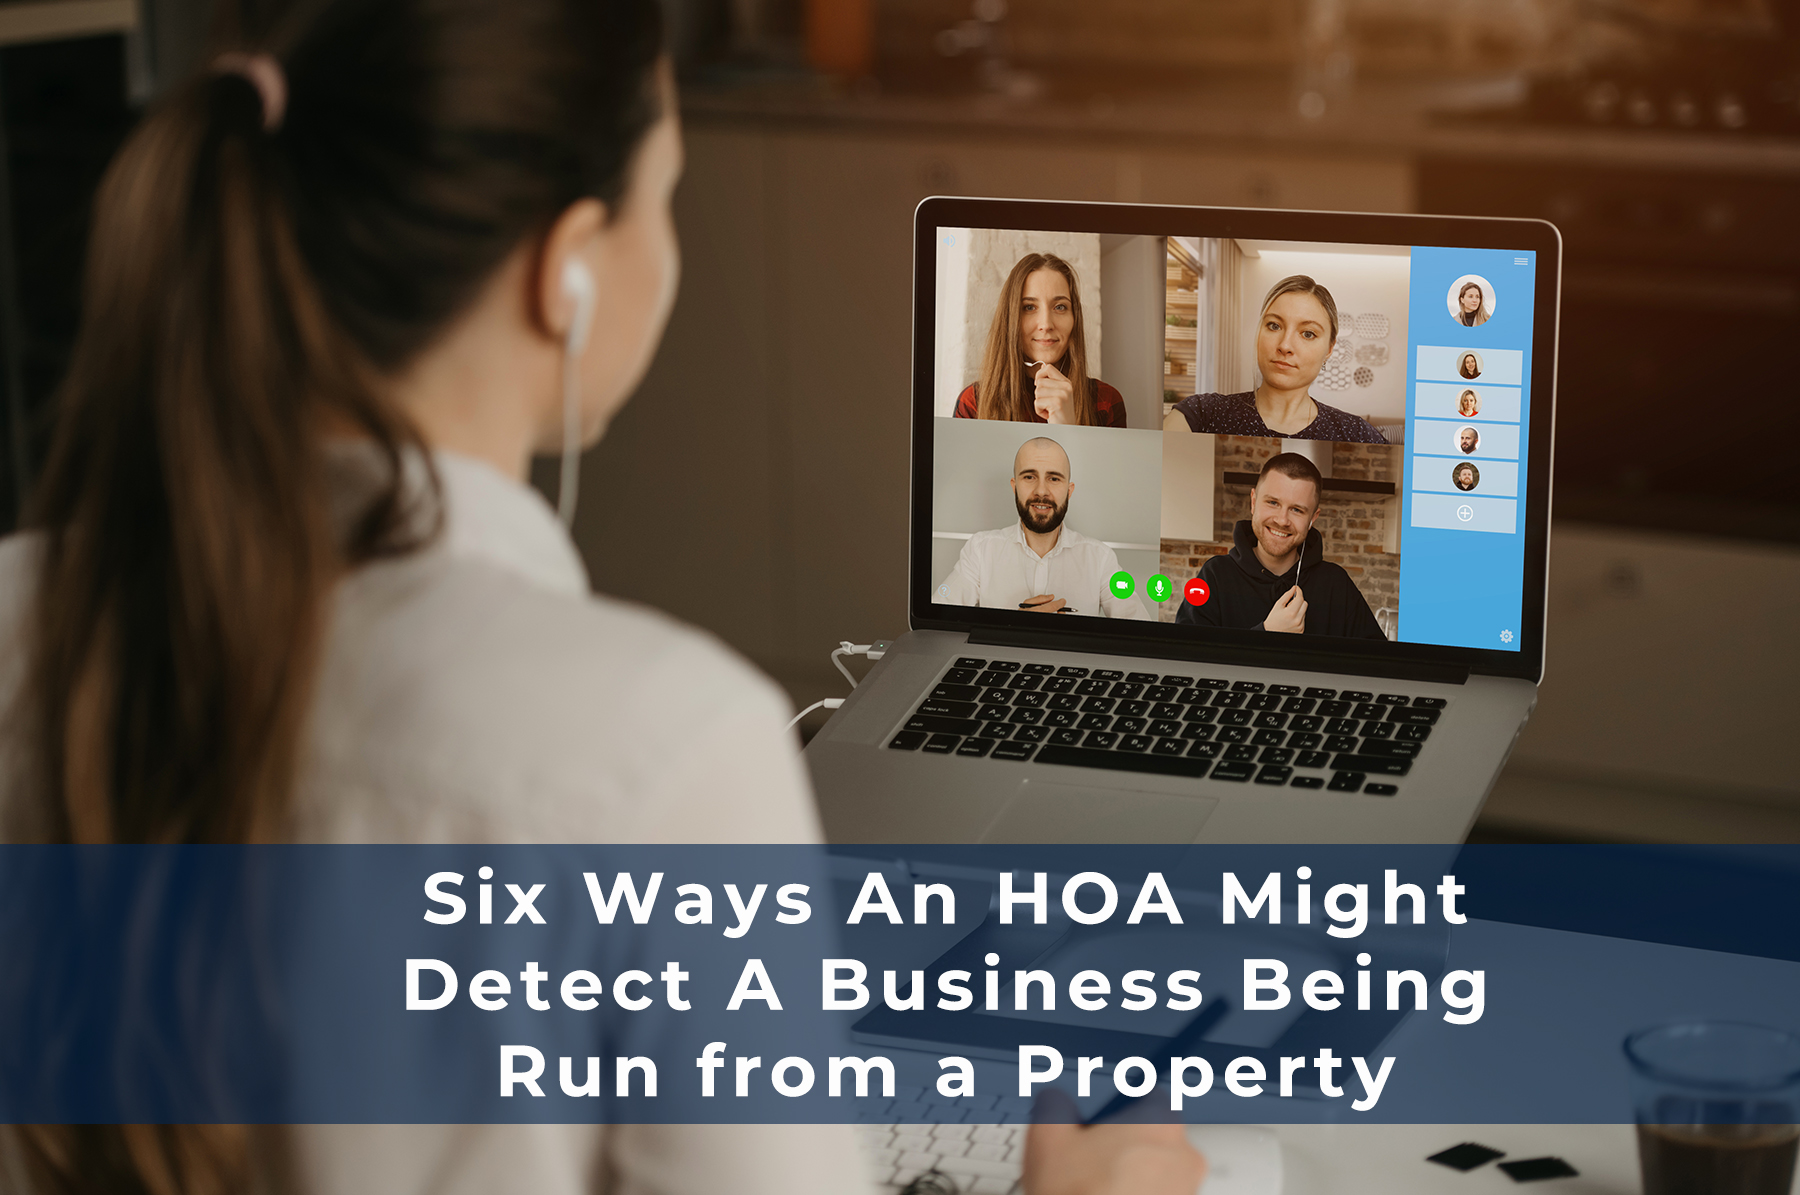 Six Ways An HOA Might Detect A Business Being Run from a Property